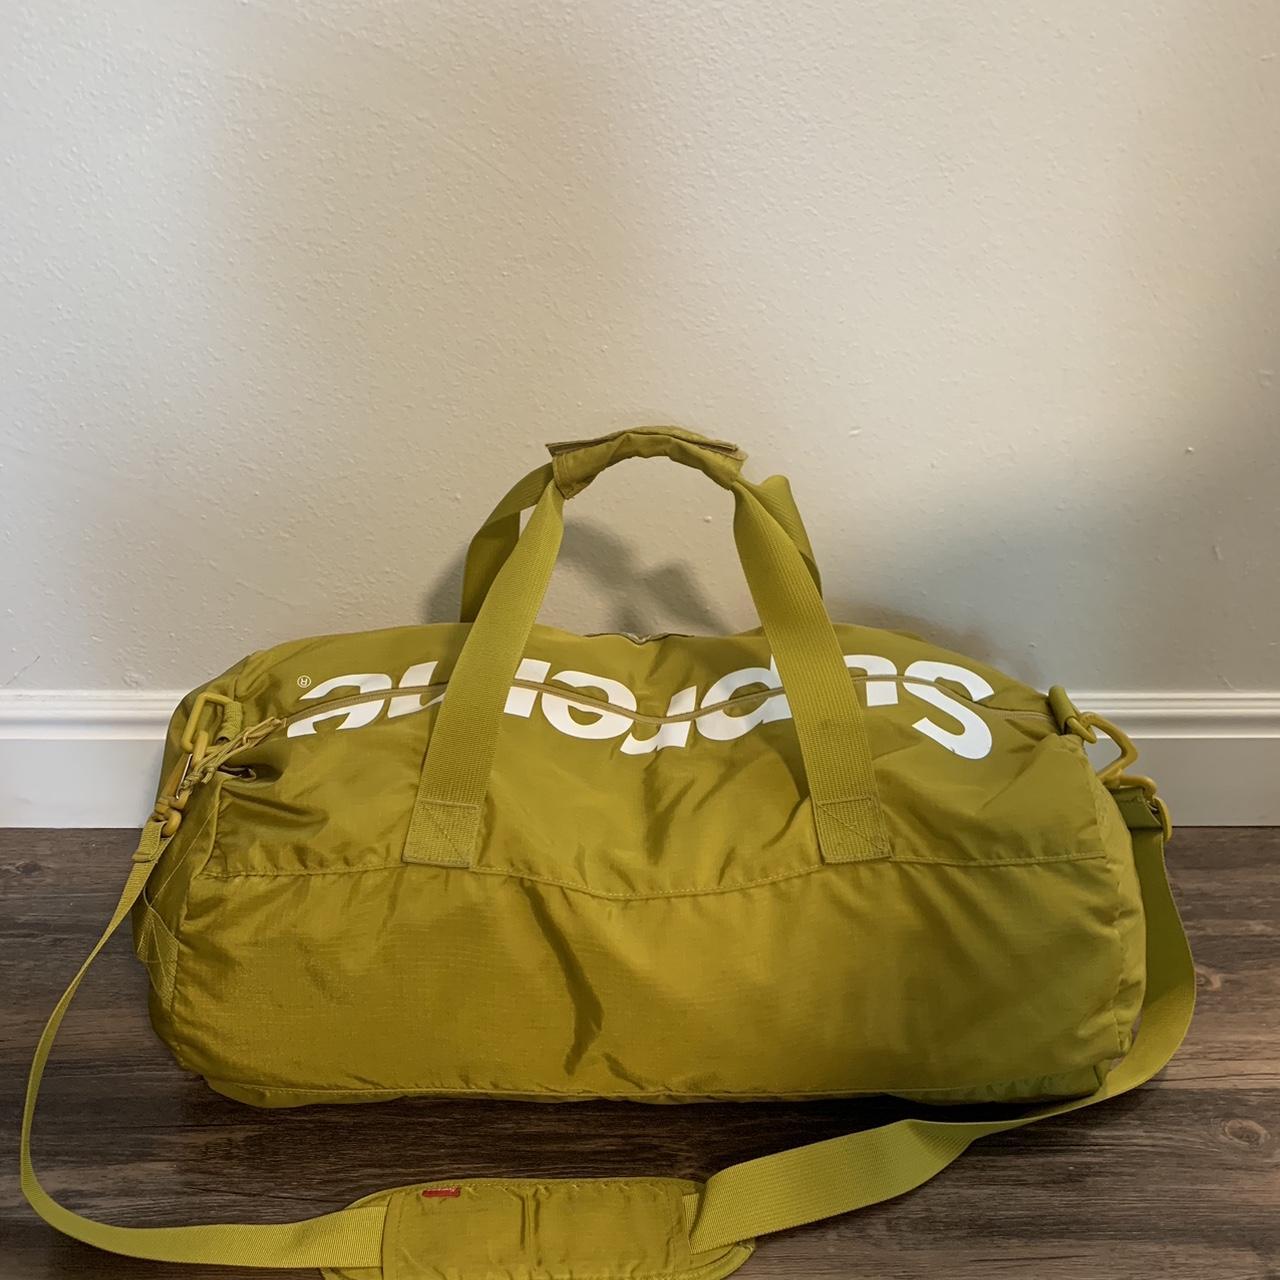 Supreme ss17 yellow duffel bag. Very rare only other